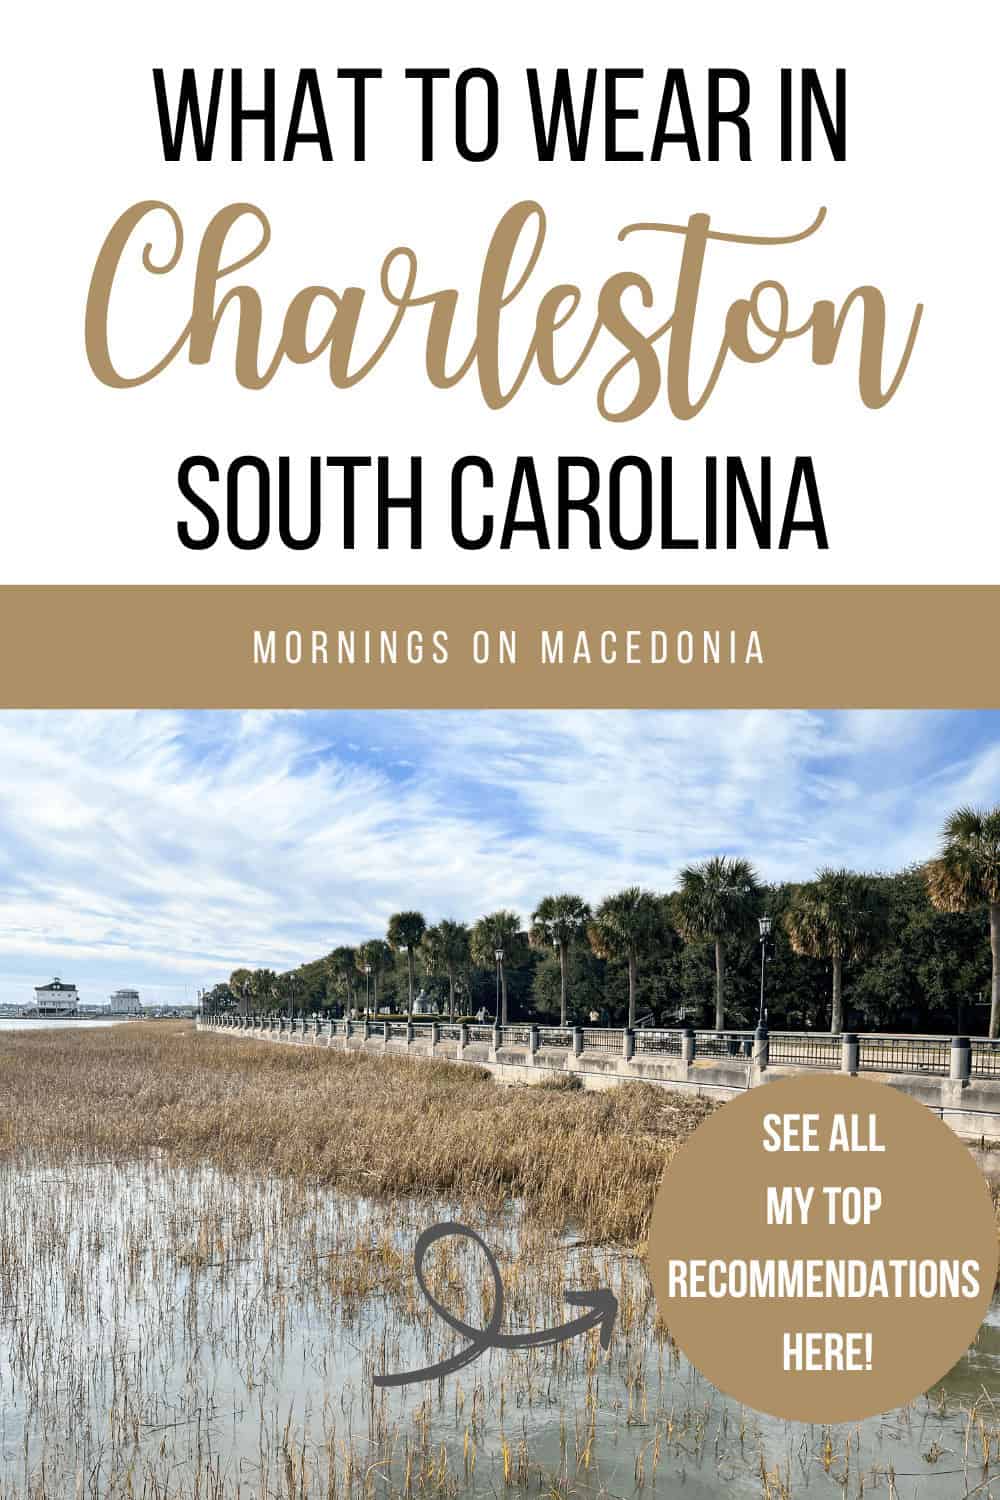 A guide titled "What to Wear in Charleston, South Carolina" with an image of a scenic waterfront boardwalk lined with palm trees. Text overlay directs to top recommendations.